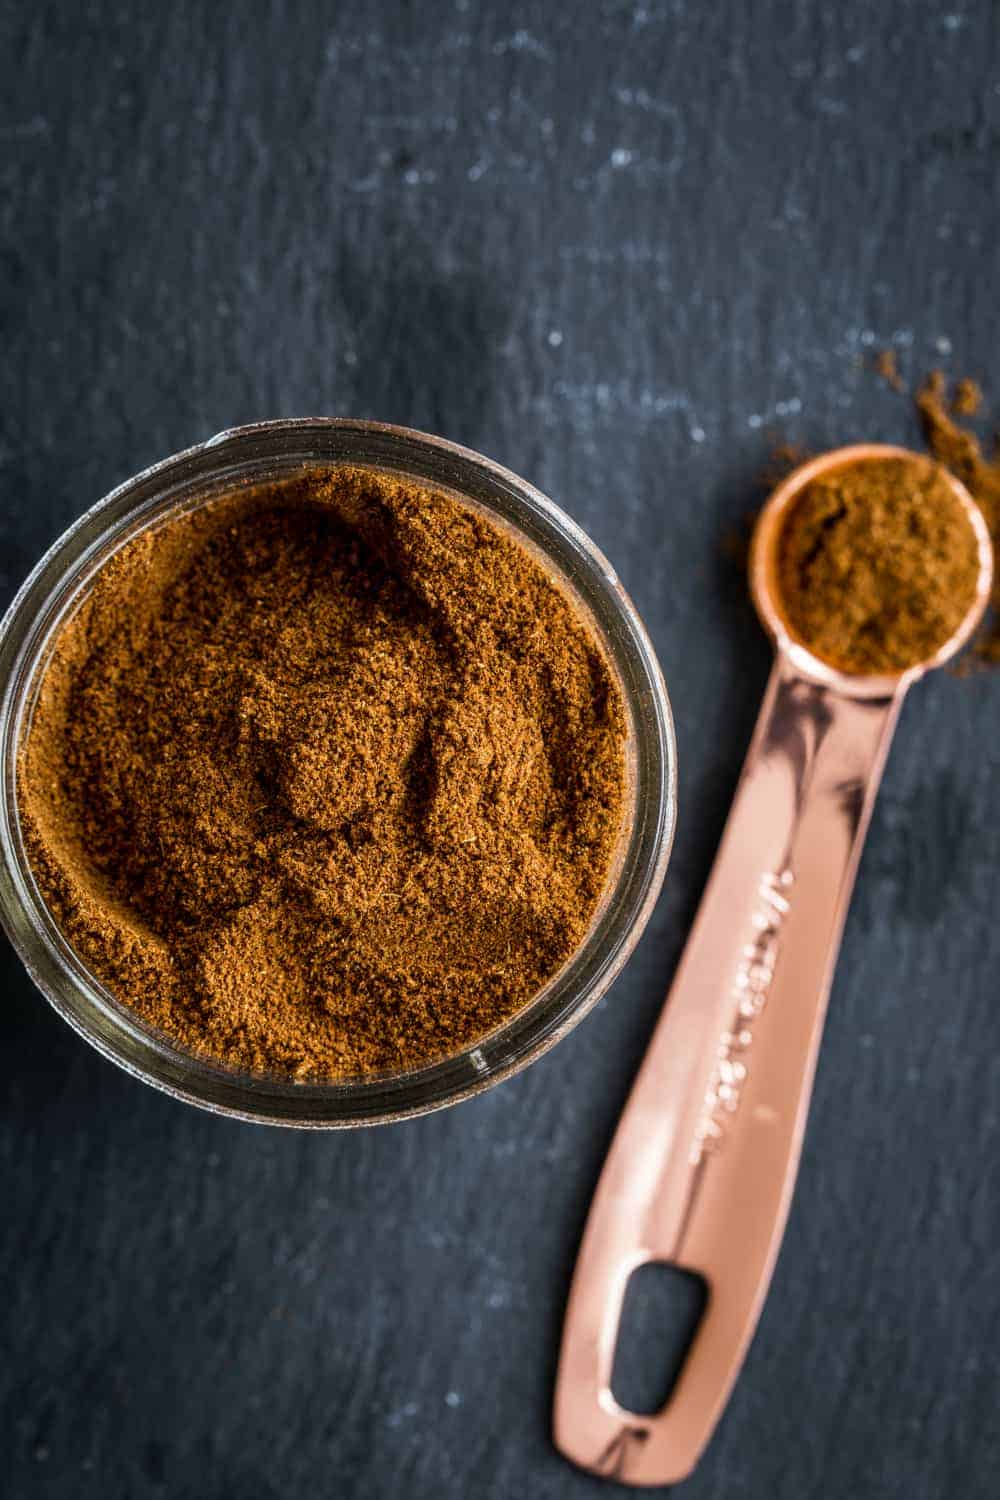 Pumpkin Pie Spice is so easy to make at home! With just a handful of spices you'll have the perfect spice blend for fall baking.